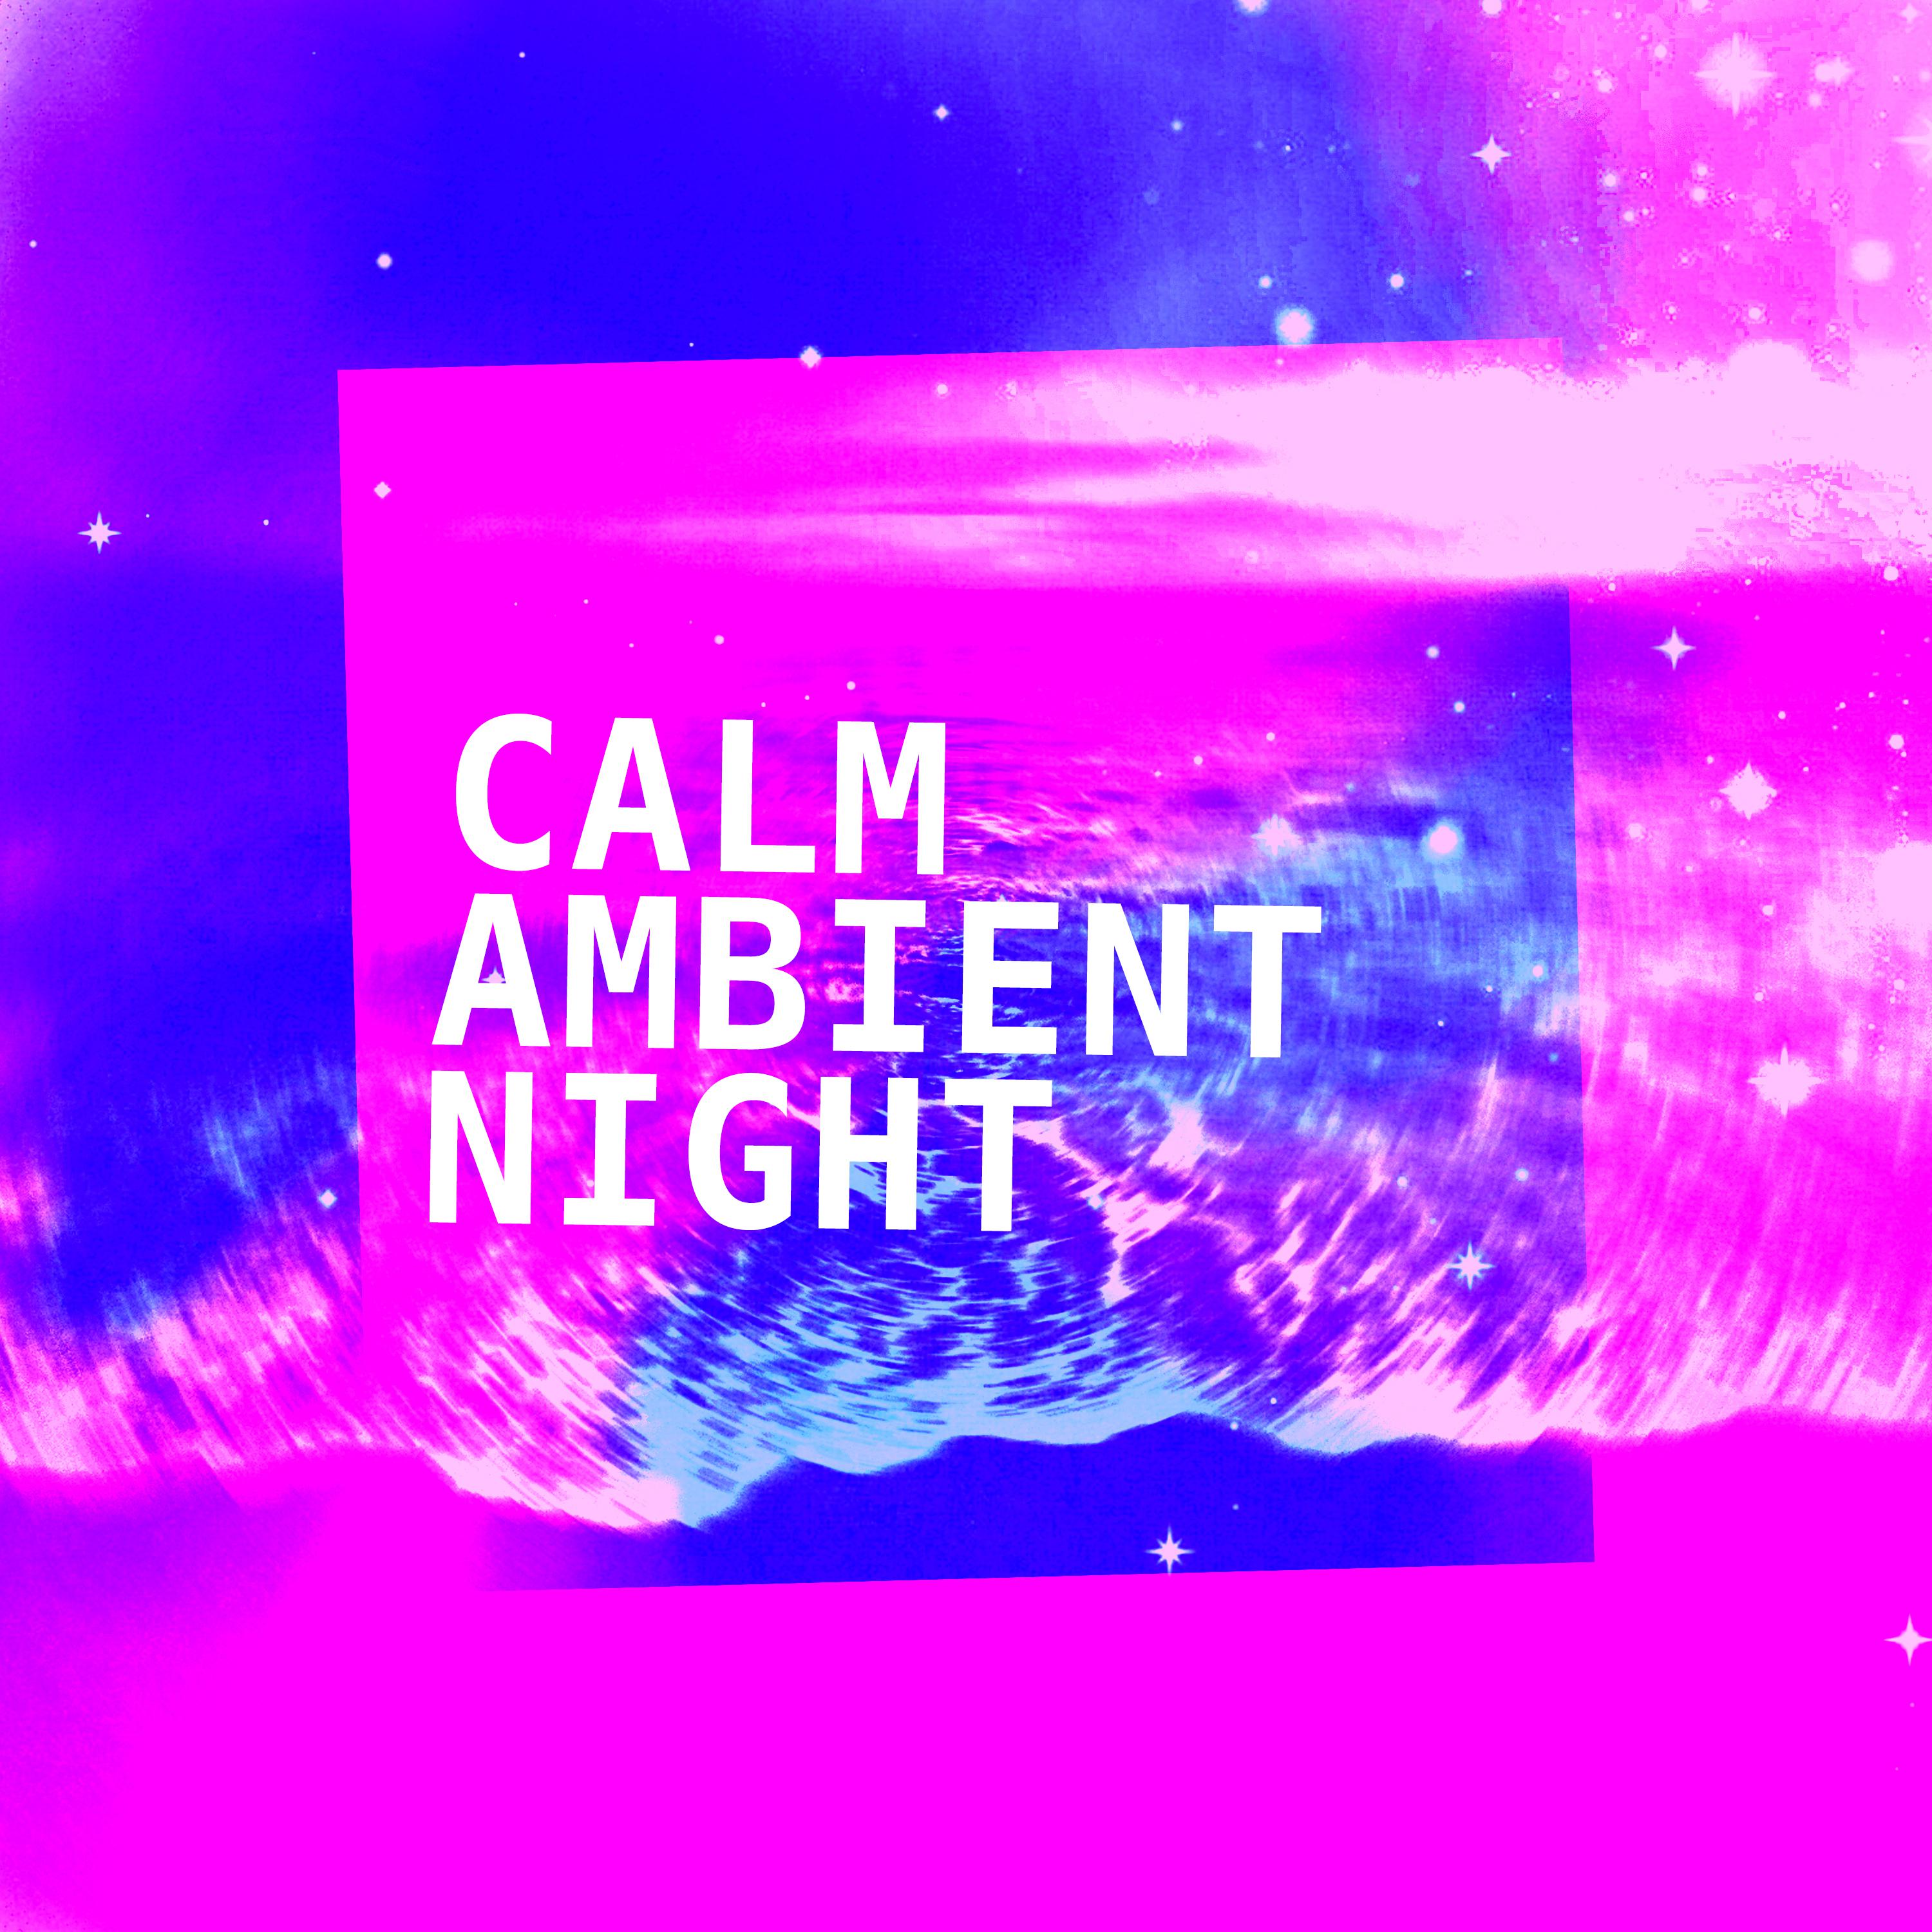 Calm Ambient Night